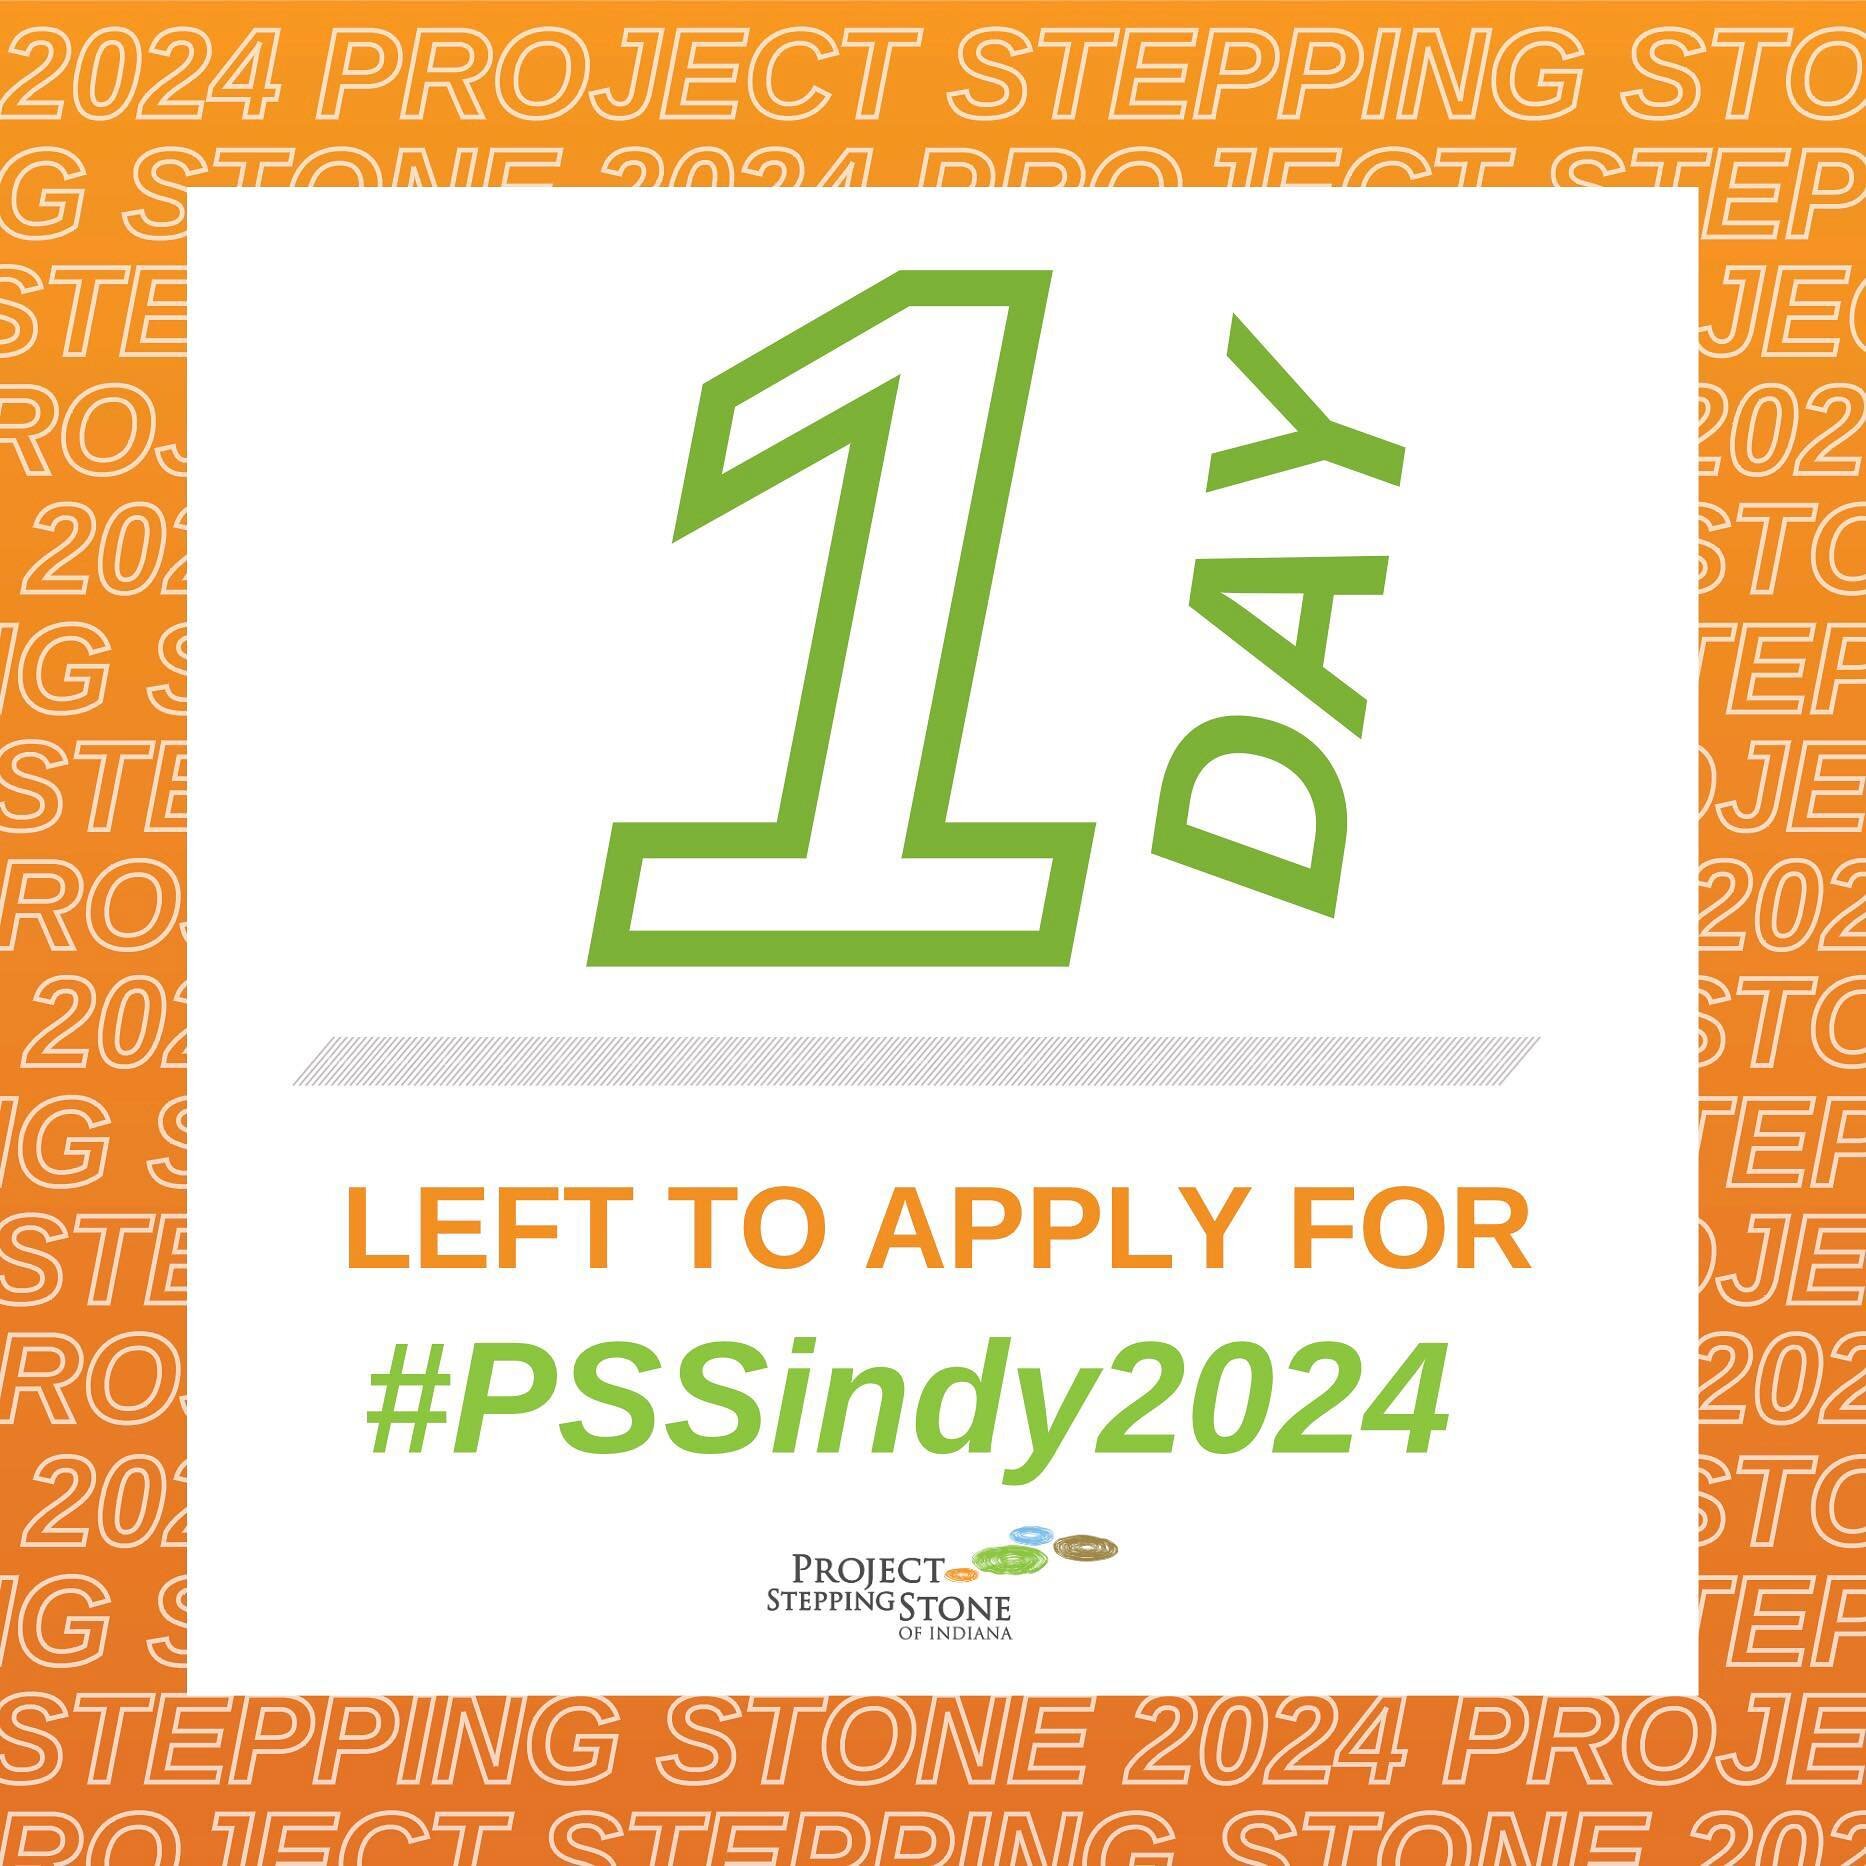 ⏰ATTENTION: Tomorrow is the deadline for ALL #PSSindy2024 Applications! Be sure to finish your PSS Student, Ambassador, or Intern application by March 31, 2024 @ 11:59 PM ET. 
.
.
.
#ProjectSteppingStone #finalcountdown